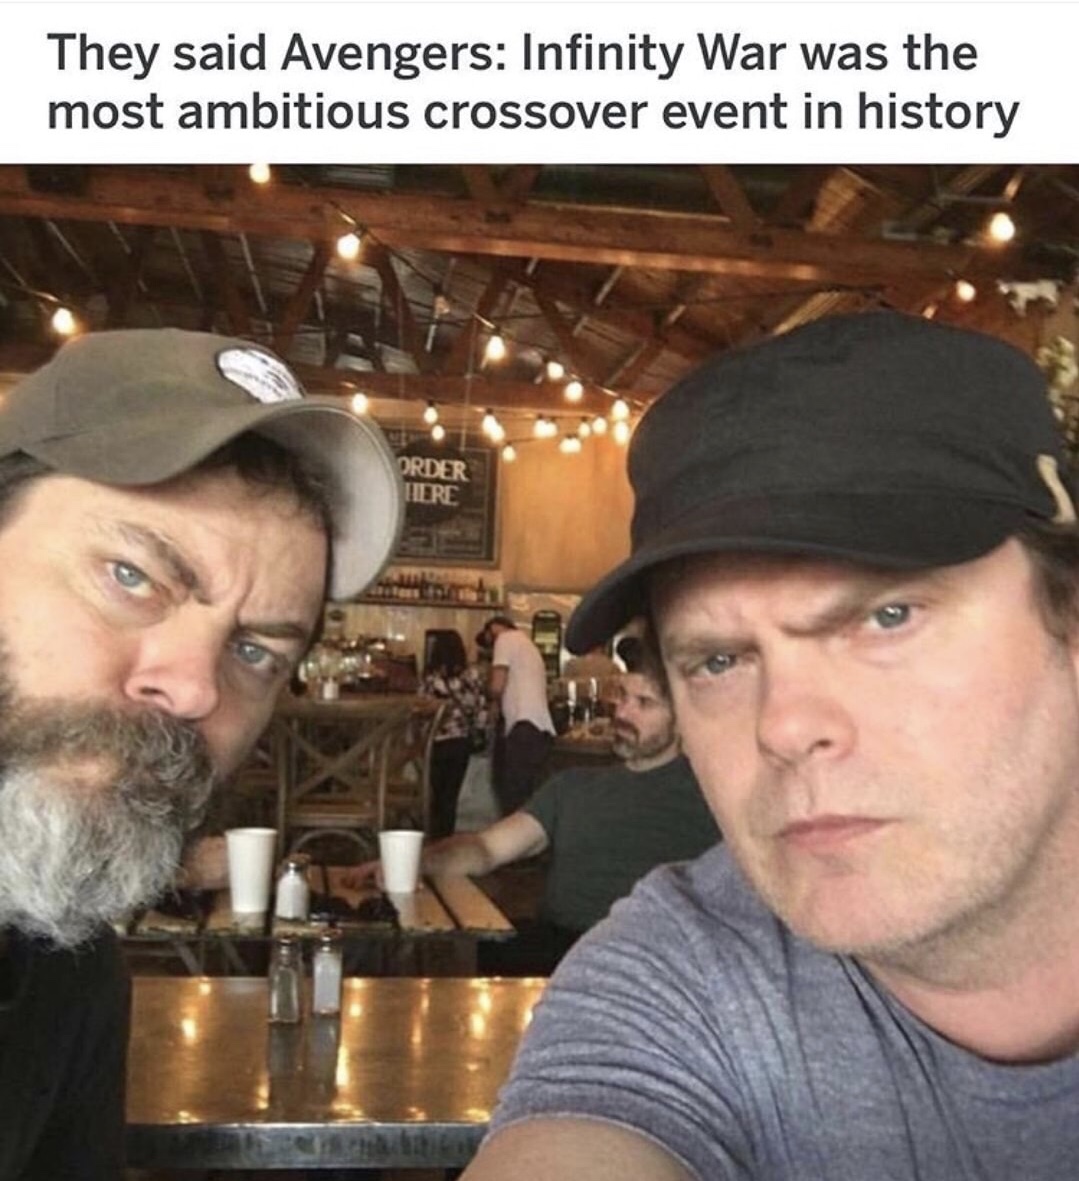 nick offerman and rainn wilson - They said Avengers Infinity War was the most ambitious crossover event in history Order Tilre